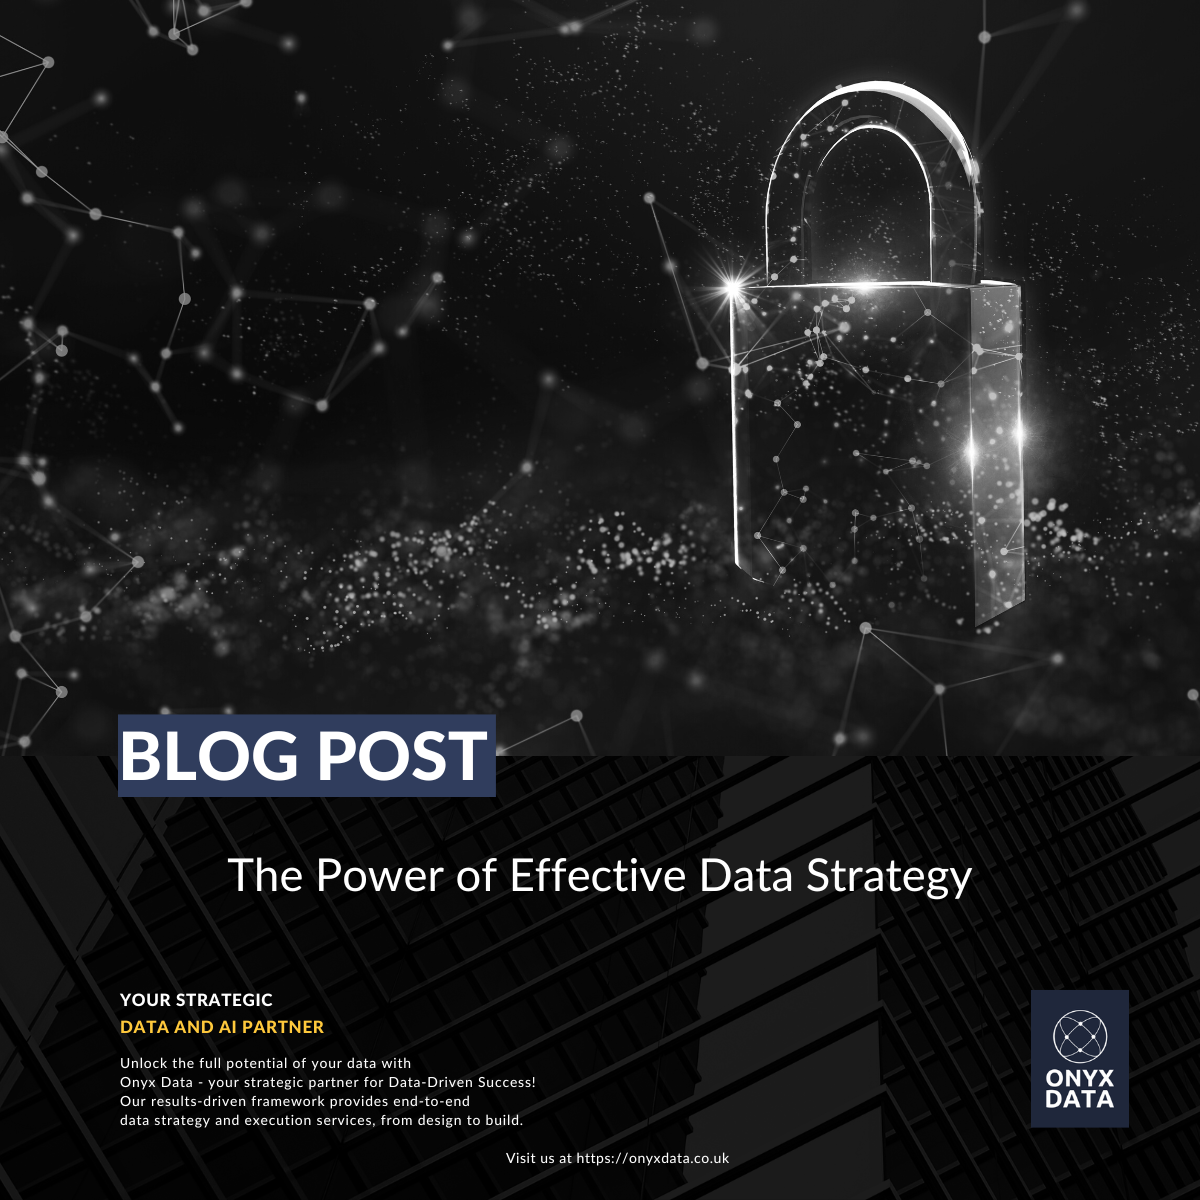 The Power of Effective Data Strategy